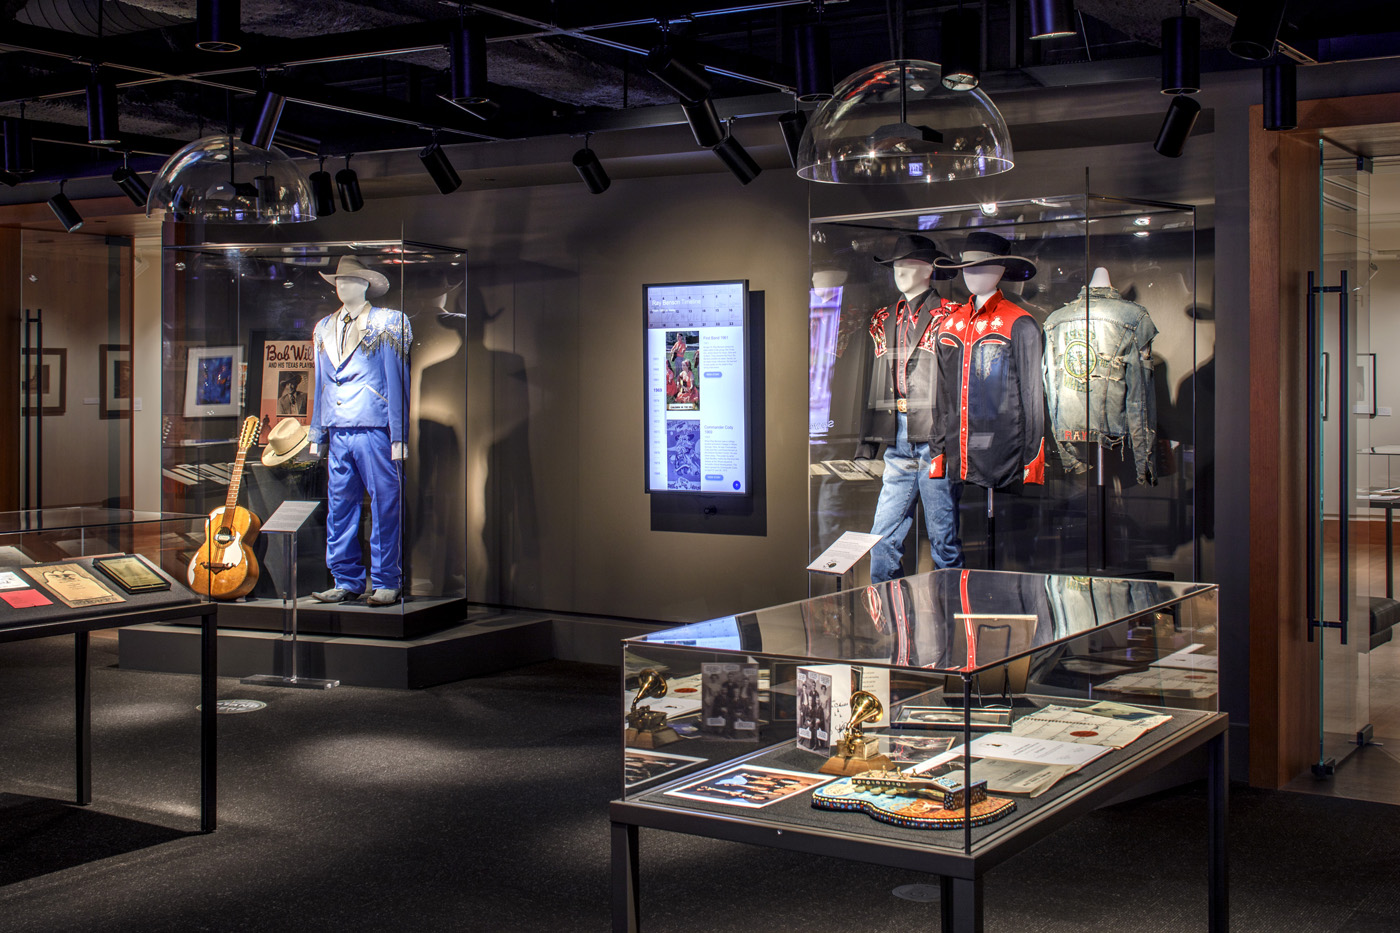 outfits and objects contained in display cases lit in dim exhibit room.